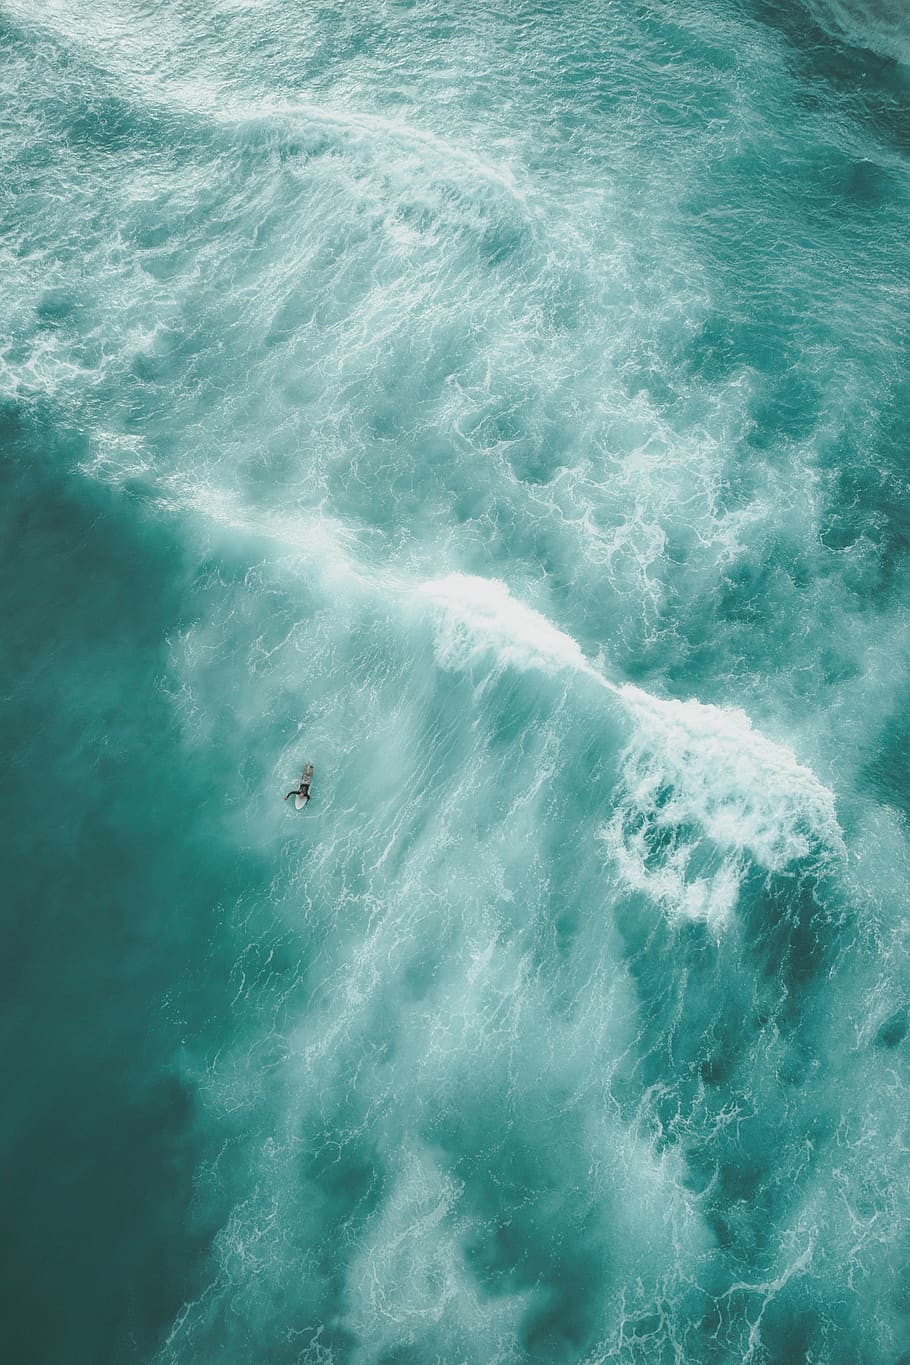 birds eye view photo of a person on body of water, person surfing aerial photography